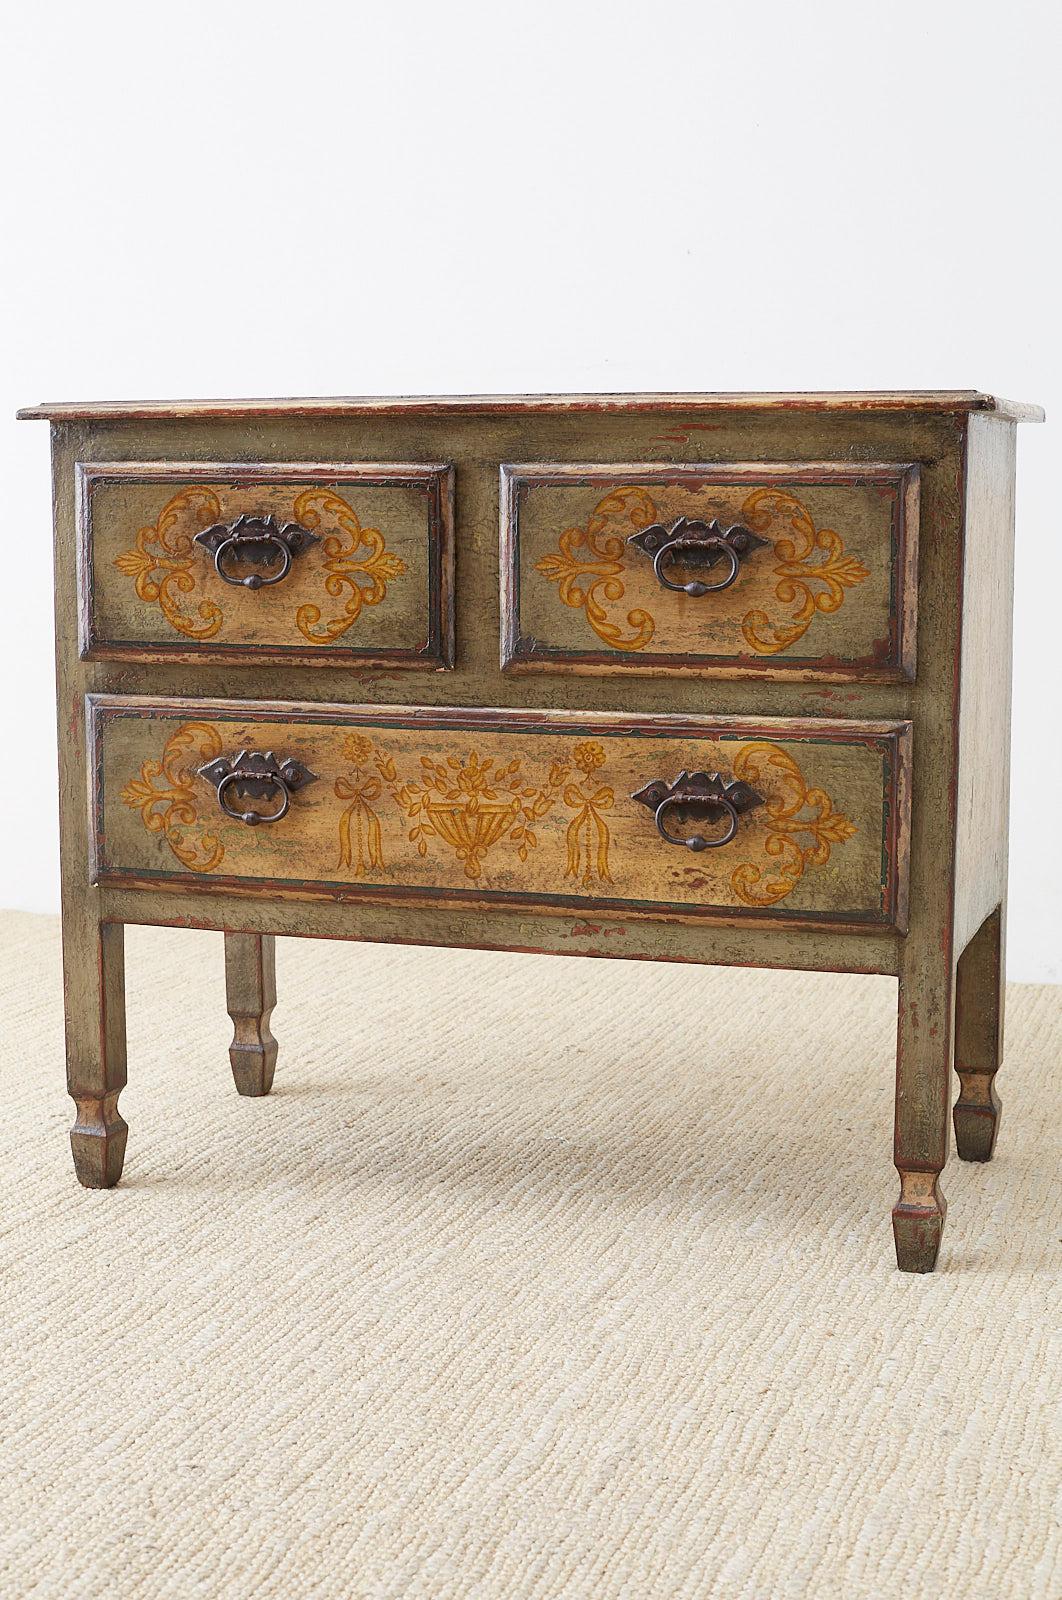 Neoclassical Venetian Style Painted Three-Drawer Commode or Chest